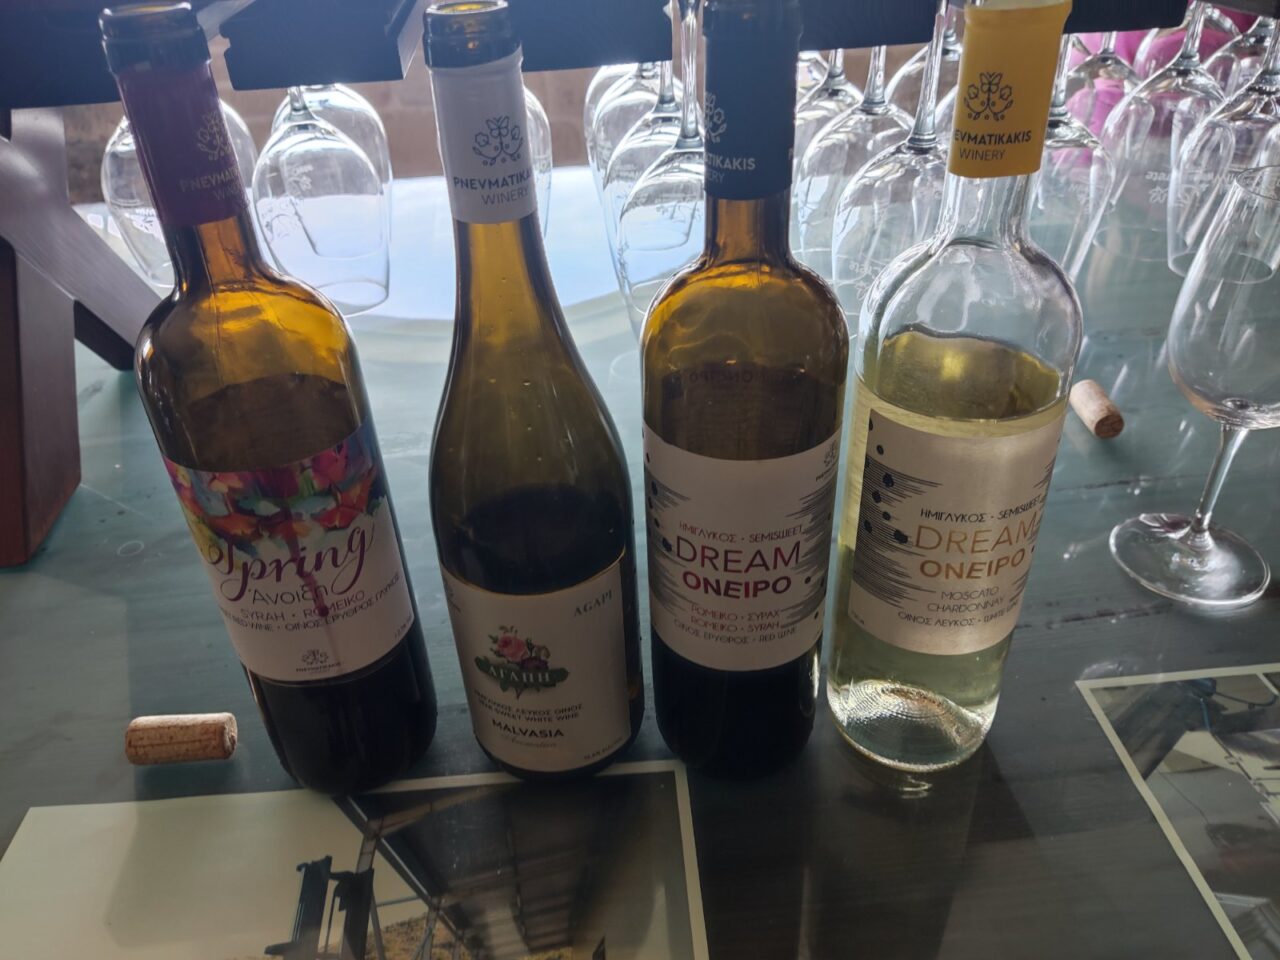 greek-wines-tasting-at-winery-day-trip-from-mistral-hotel-exclusive-to-solo-travellers-crete-greece